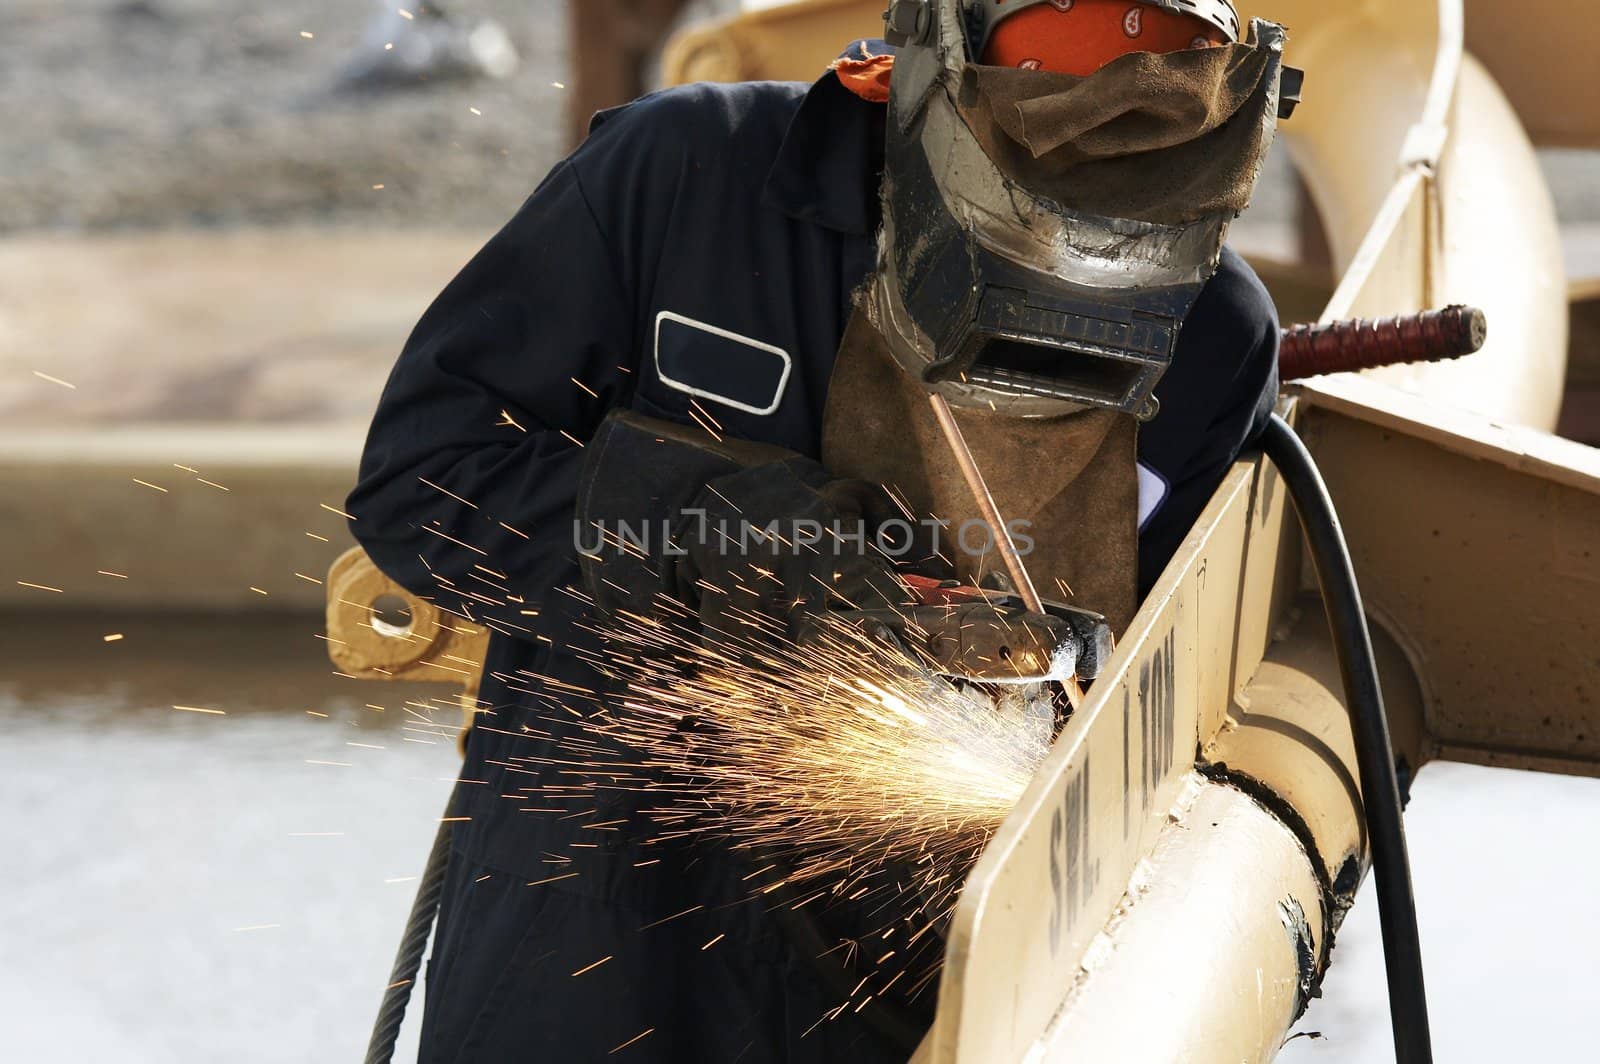 a picture of an arc welder at work